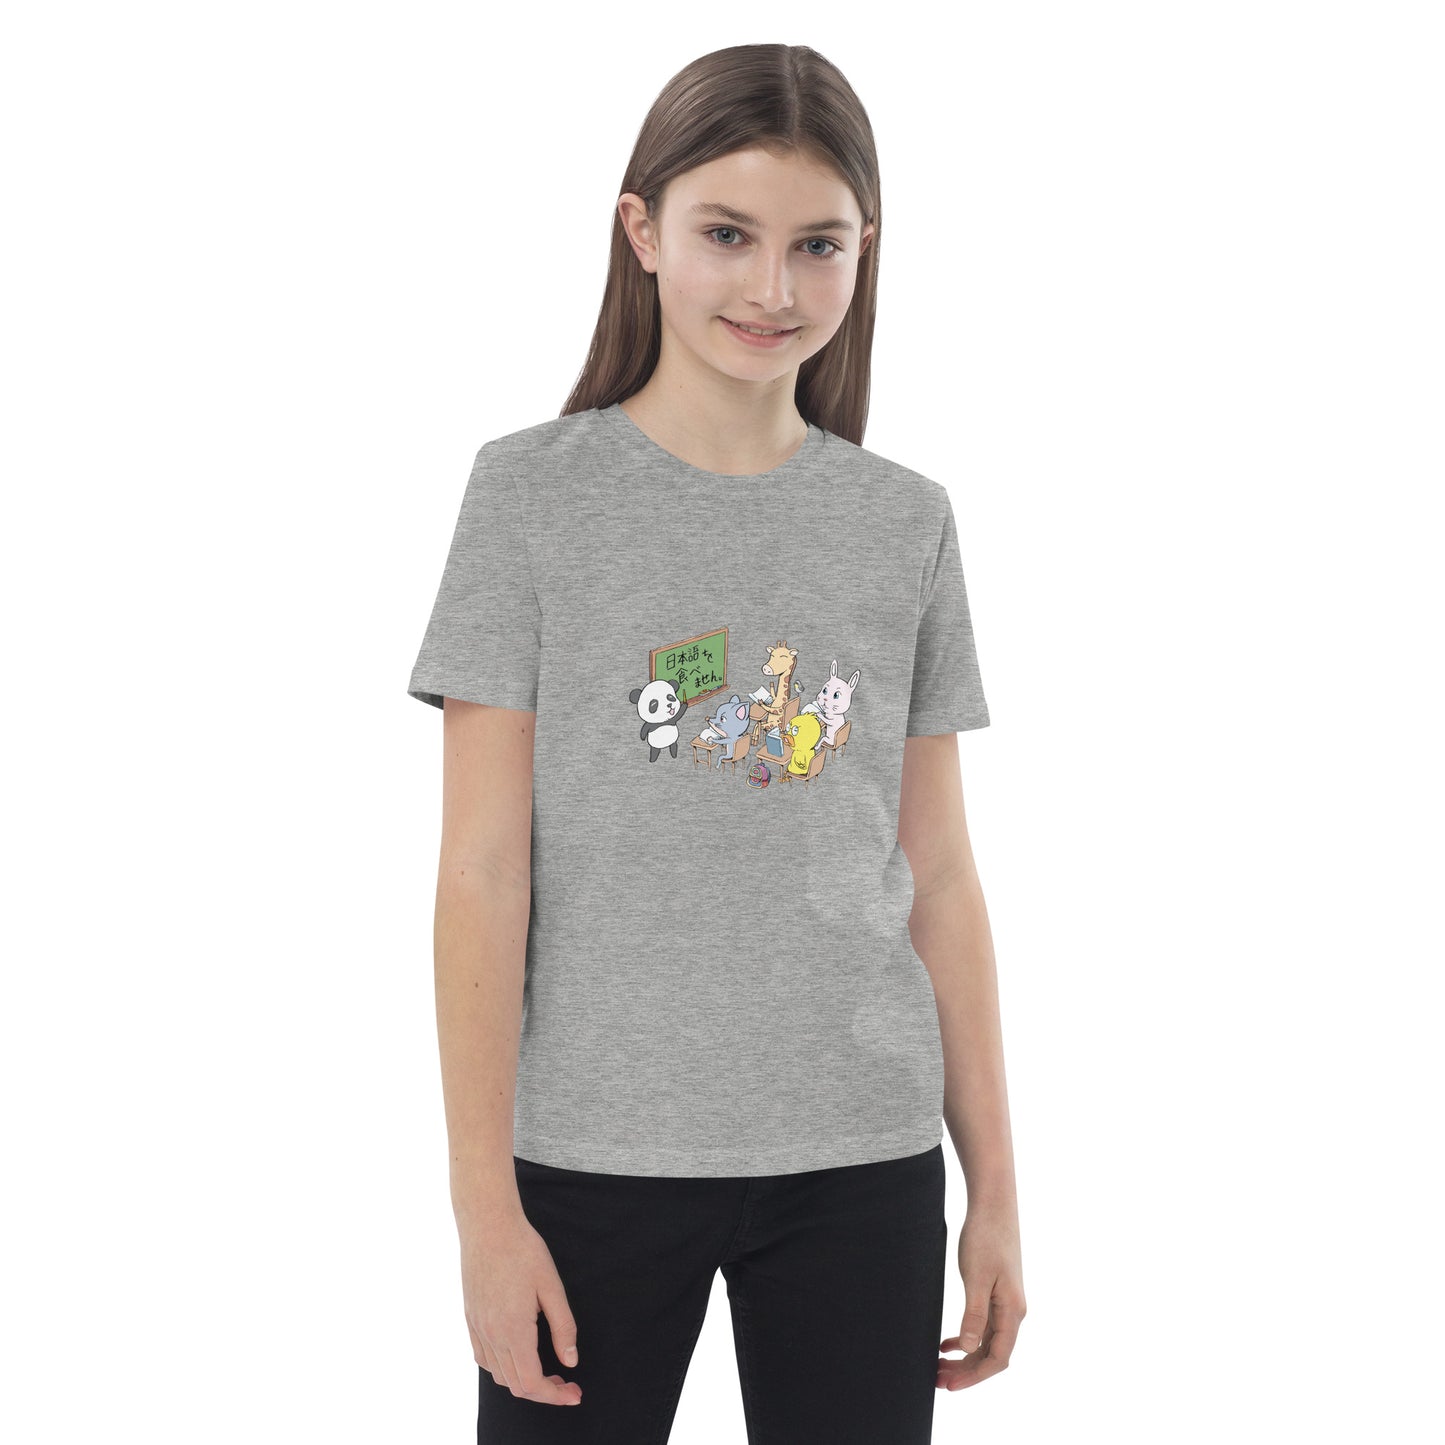 Japanese Class in the Zoo by tokyozoodesign Organic cotton kids t-shirt